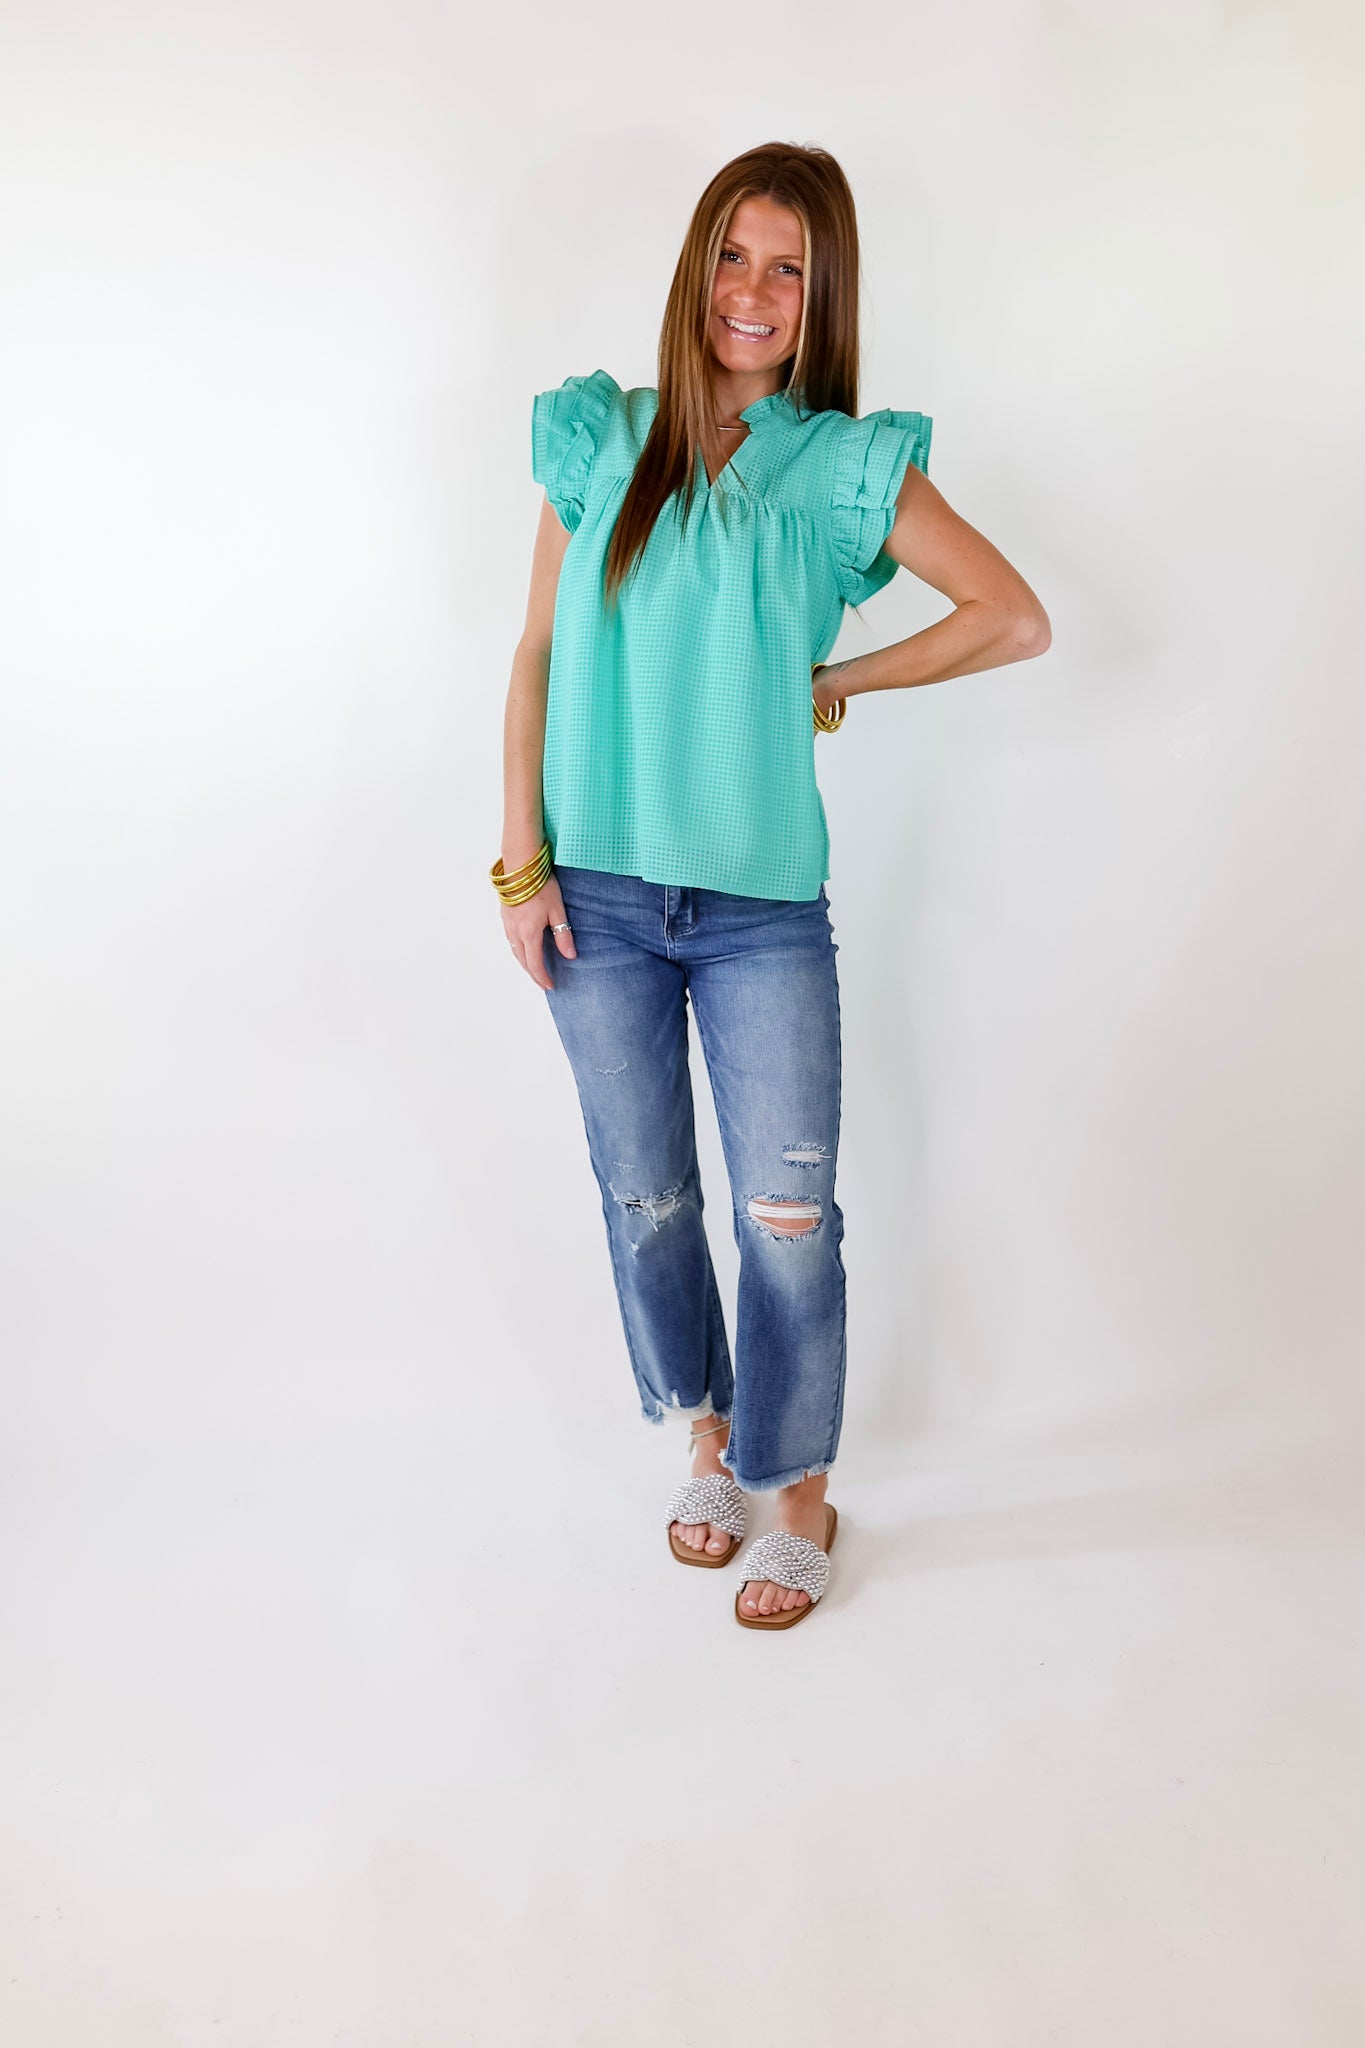 Perfectly Fabulous Ruffle Cap Sleeve Top in Mint Green - Giddy Up Glamour Boutique